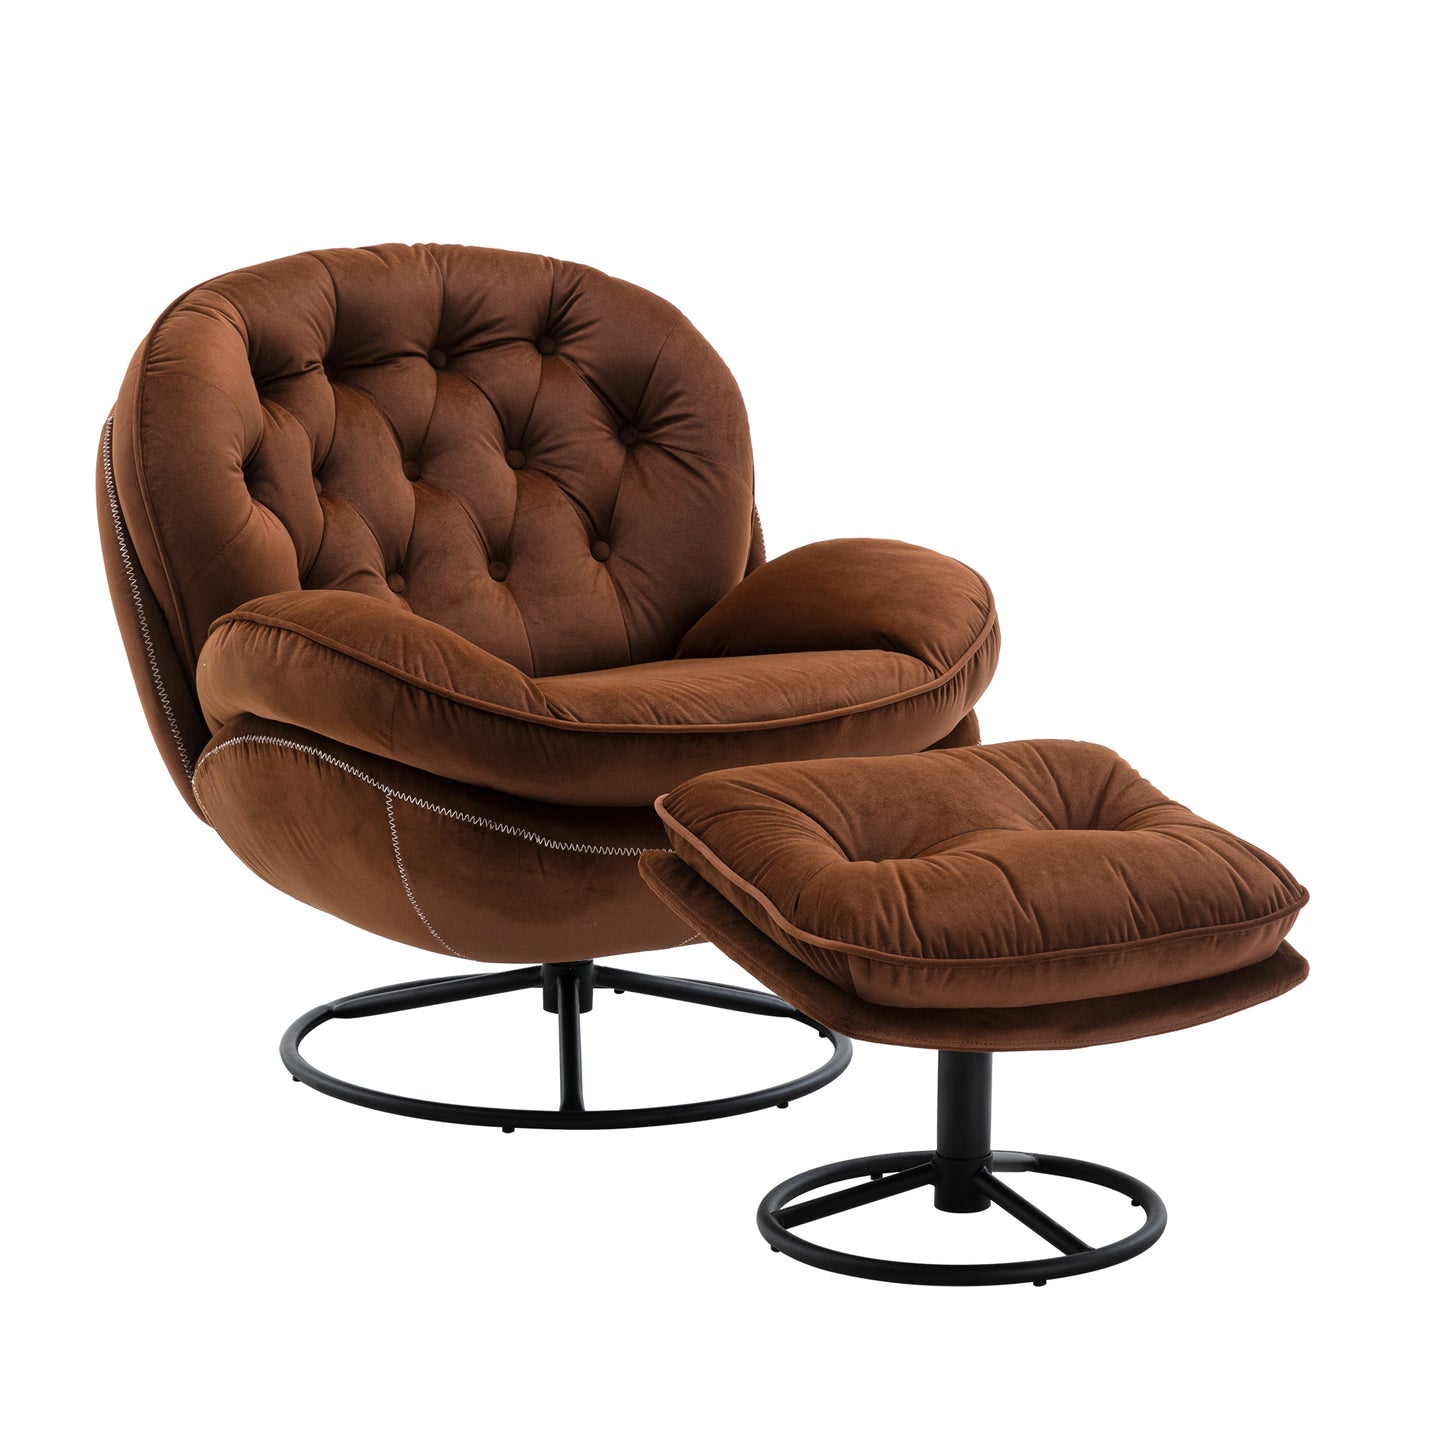 Marsh Brown Accent Chair with Ottoman